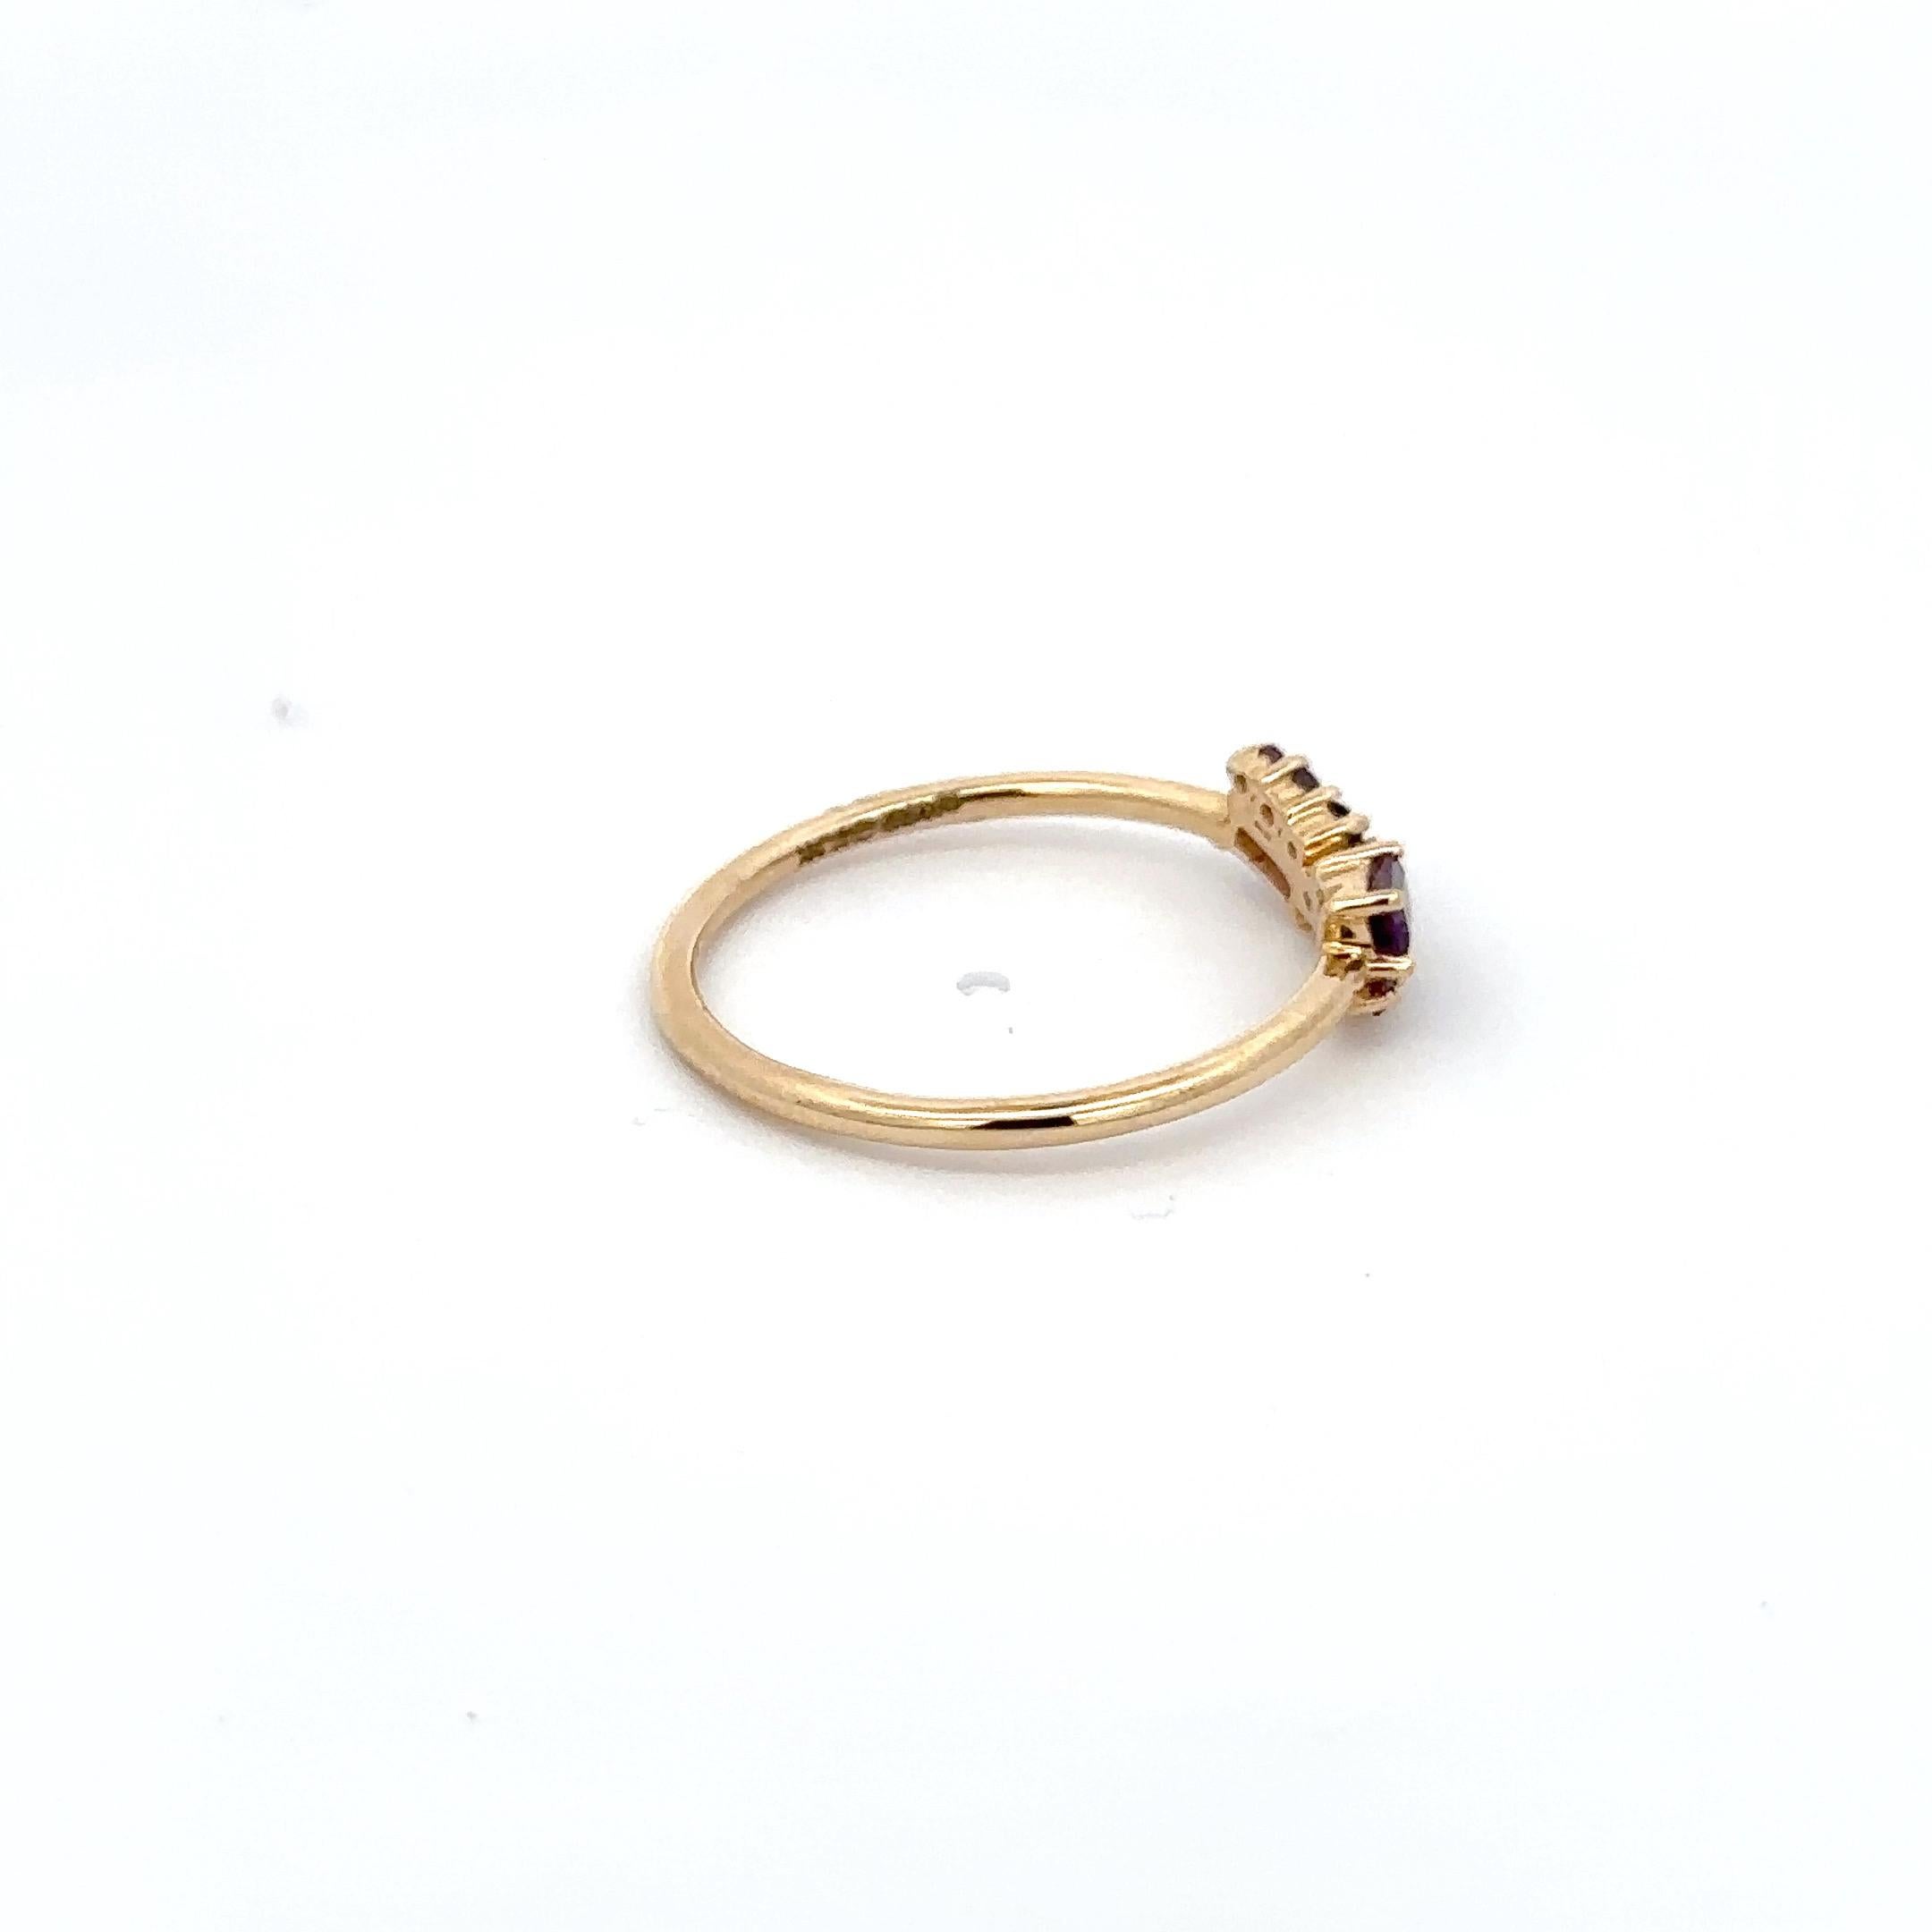 For Sale:  Everyday Wear Asymmetrical Amethyst Ring For Her in 14k Solid Yellow Gold 5